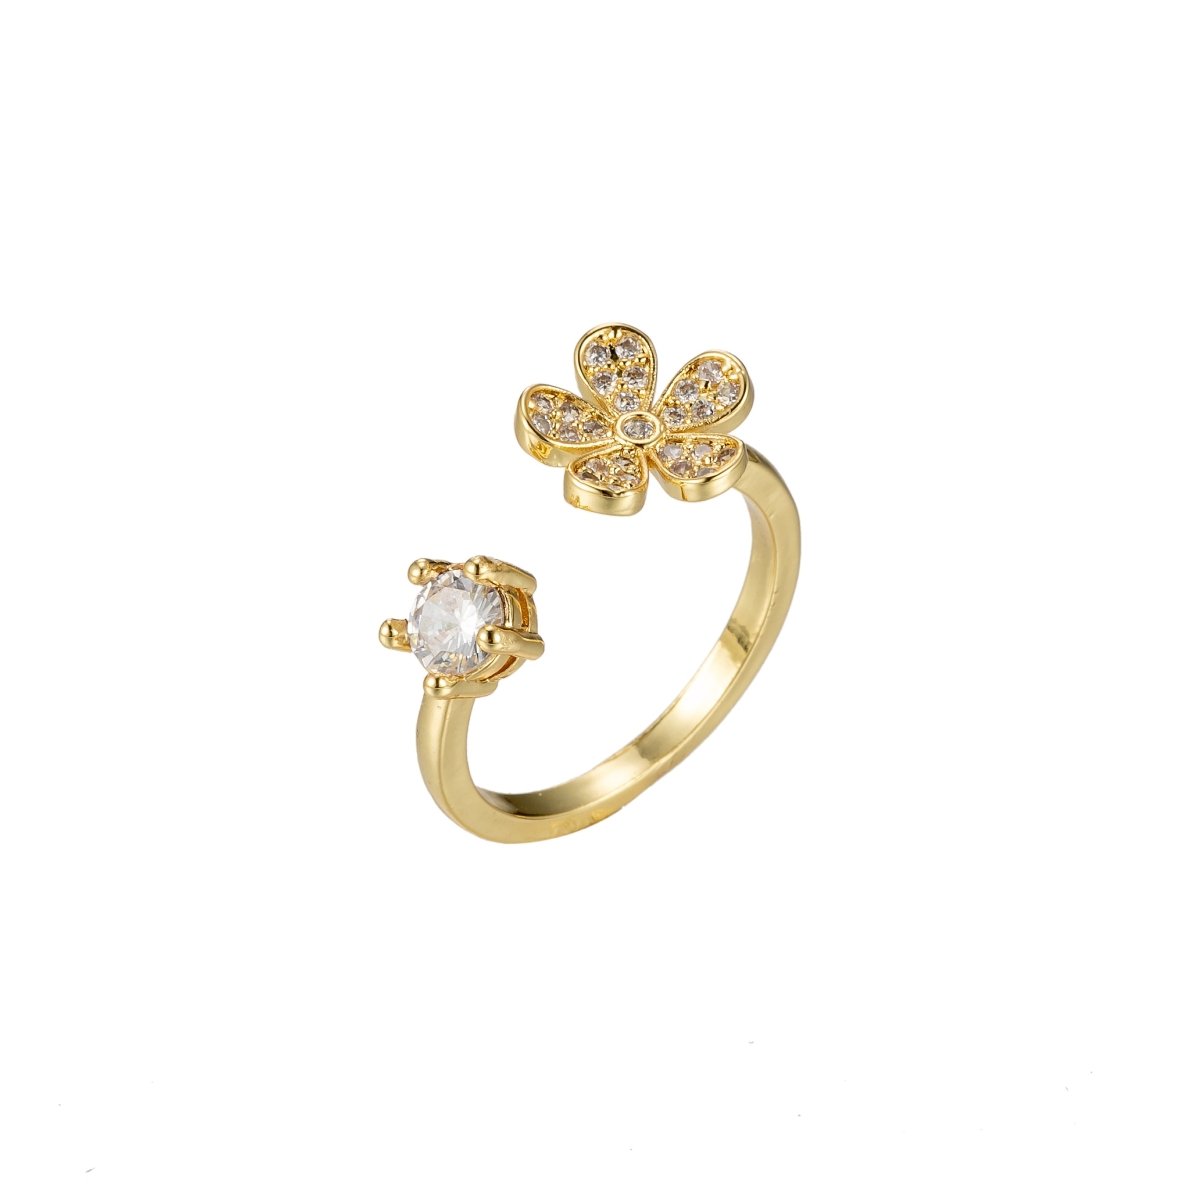 Daisy Floral Adjustable Ring Gold Daisy Ring Flower Ring Adjustable Ring Gold Color Ring for stackable Jewelry US Size 7 O-356 - DLUXCA